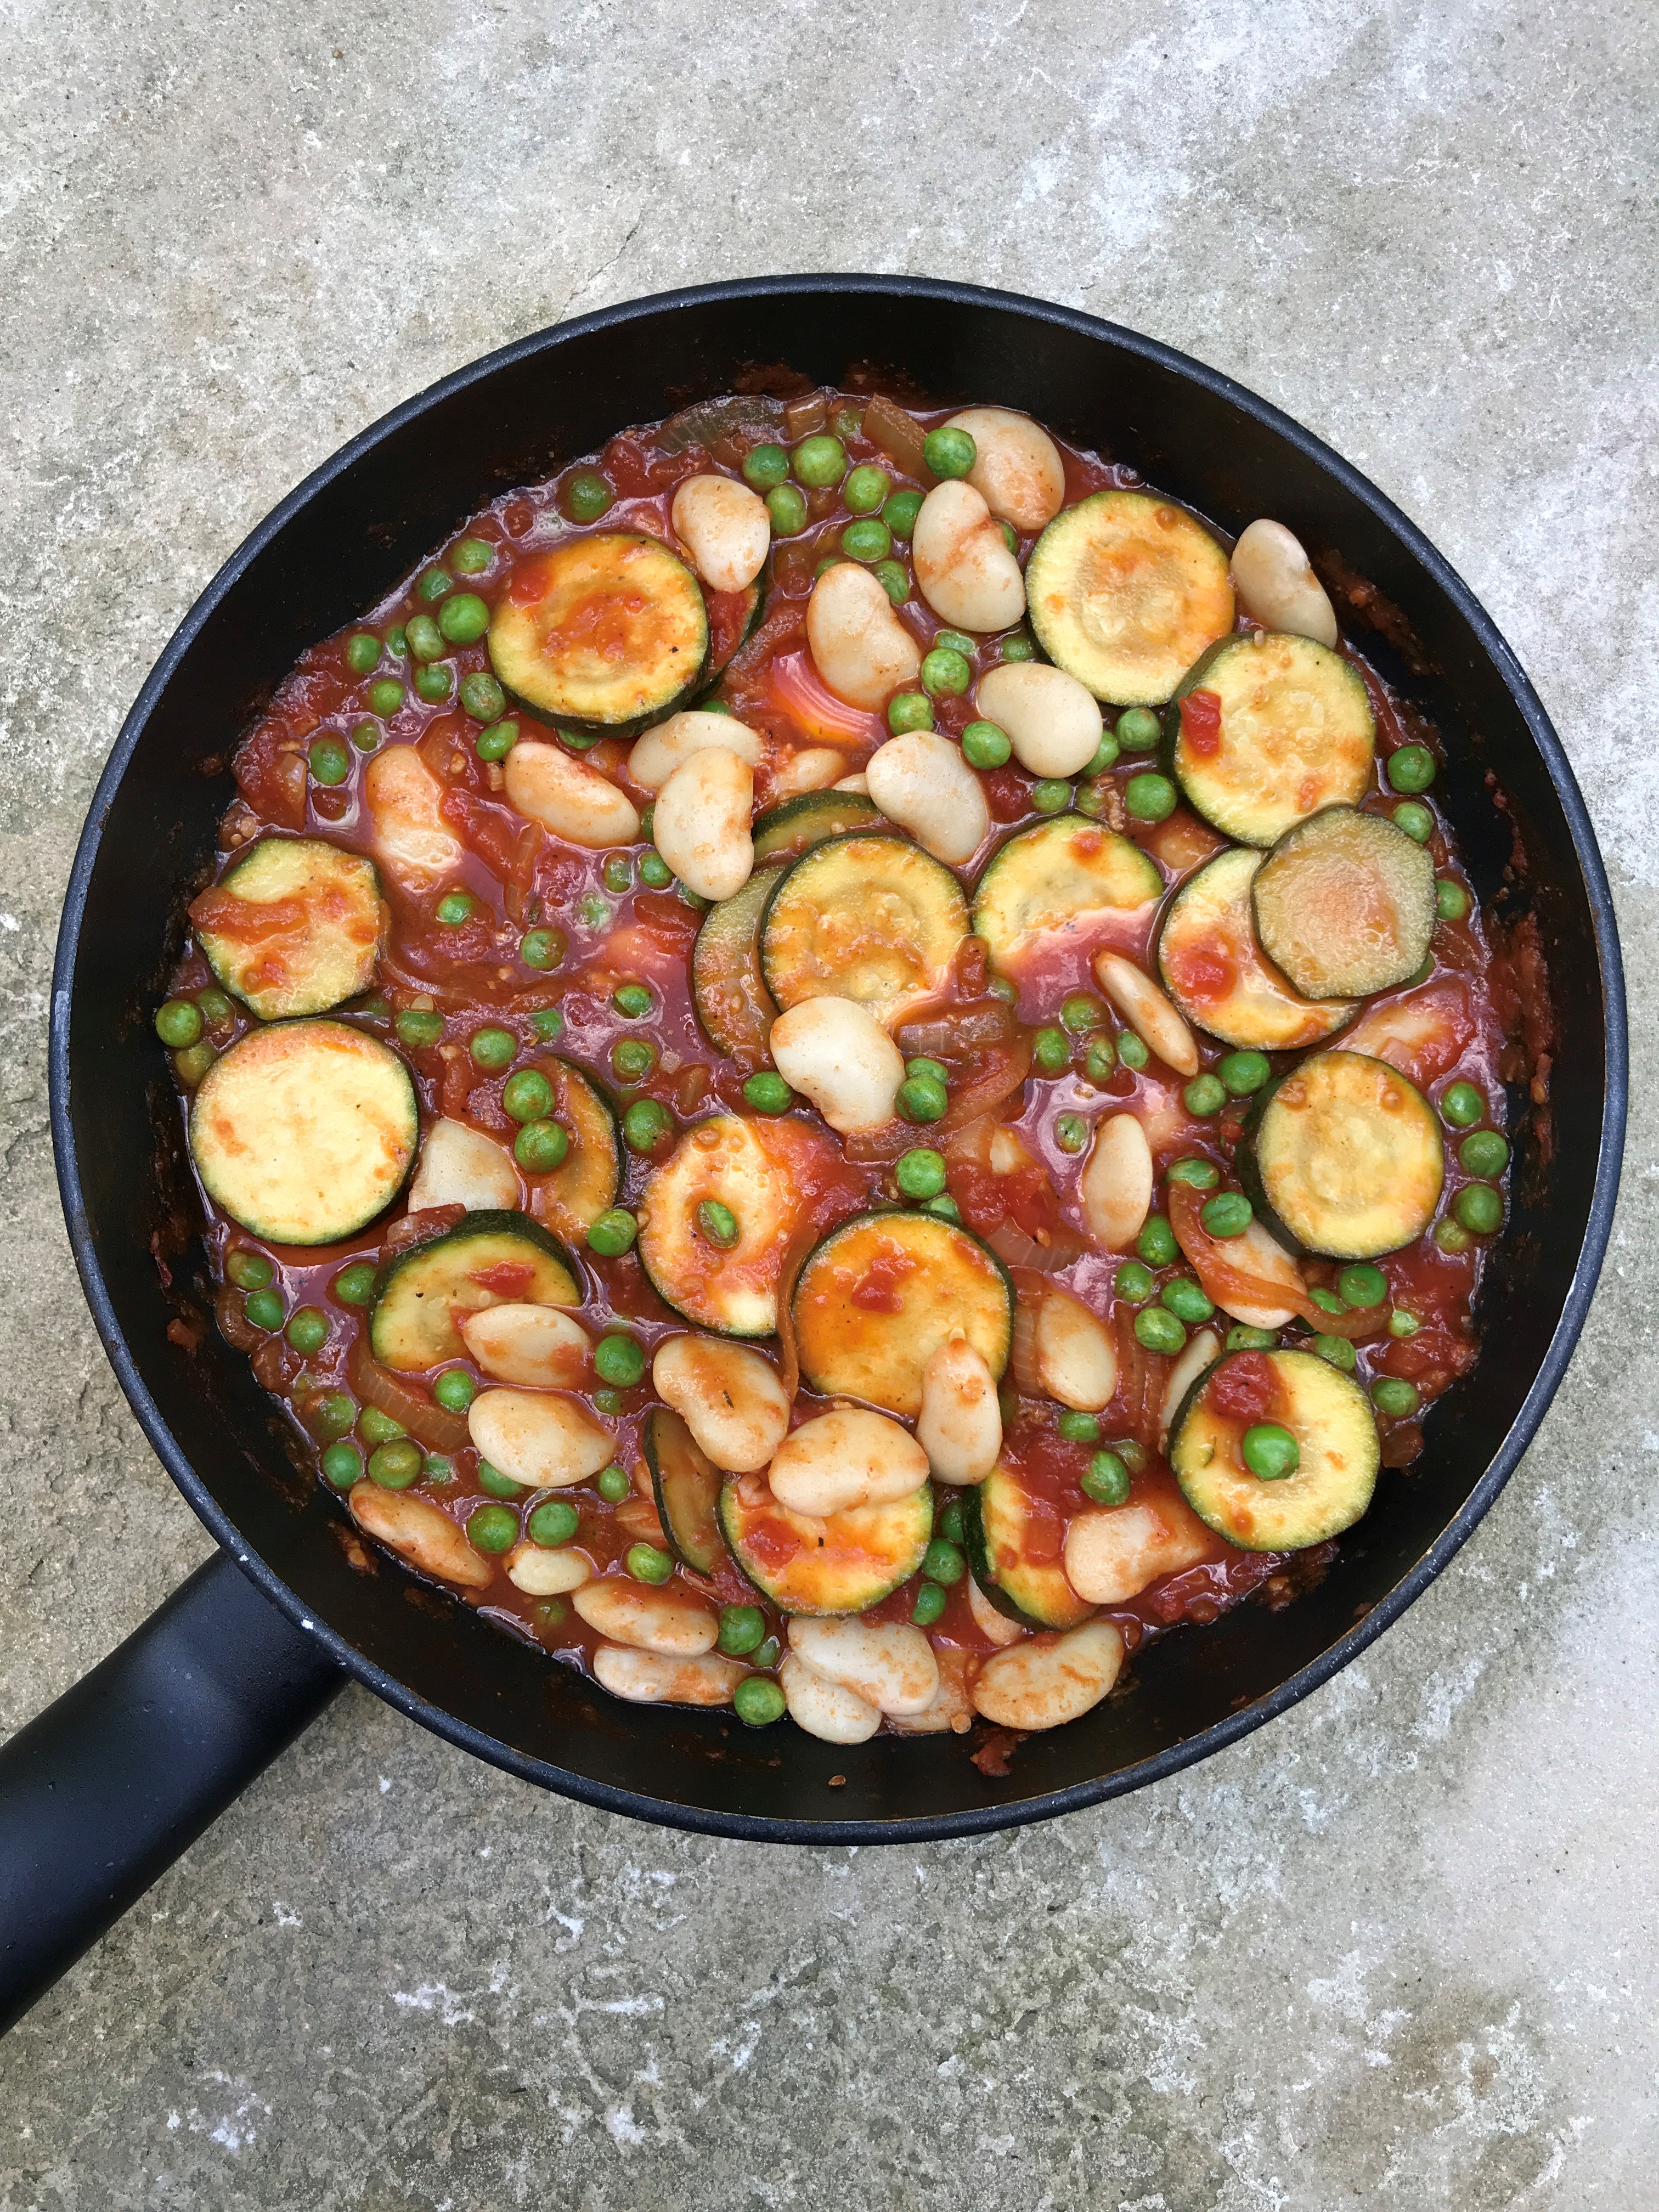 Egyptian Spiced Courgette and Butter Beans with Turmeric Dukkha